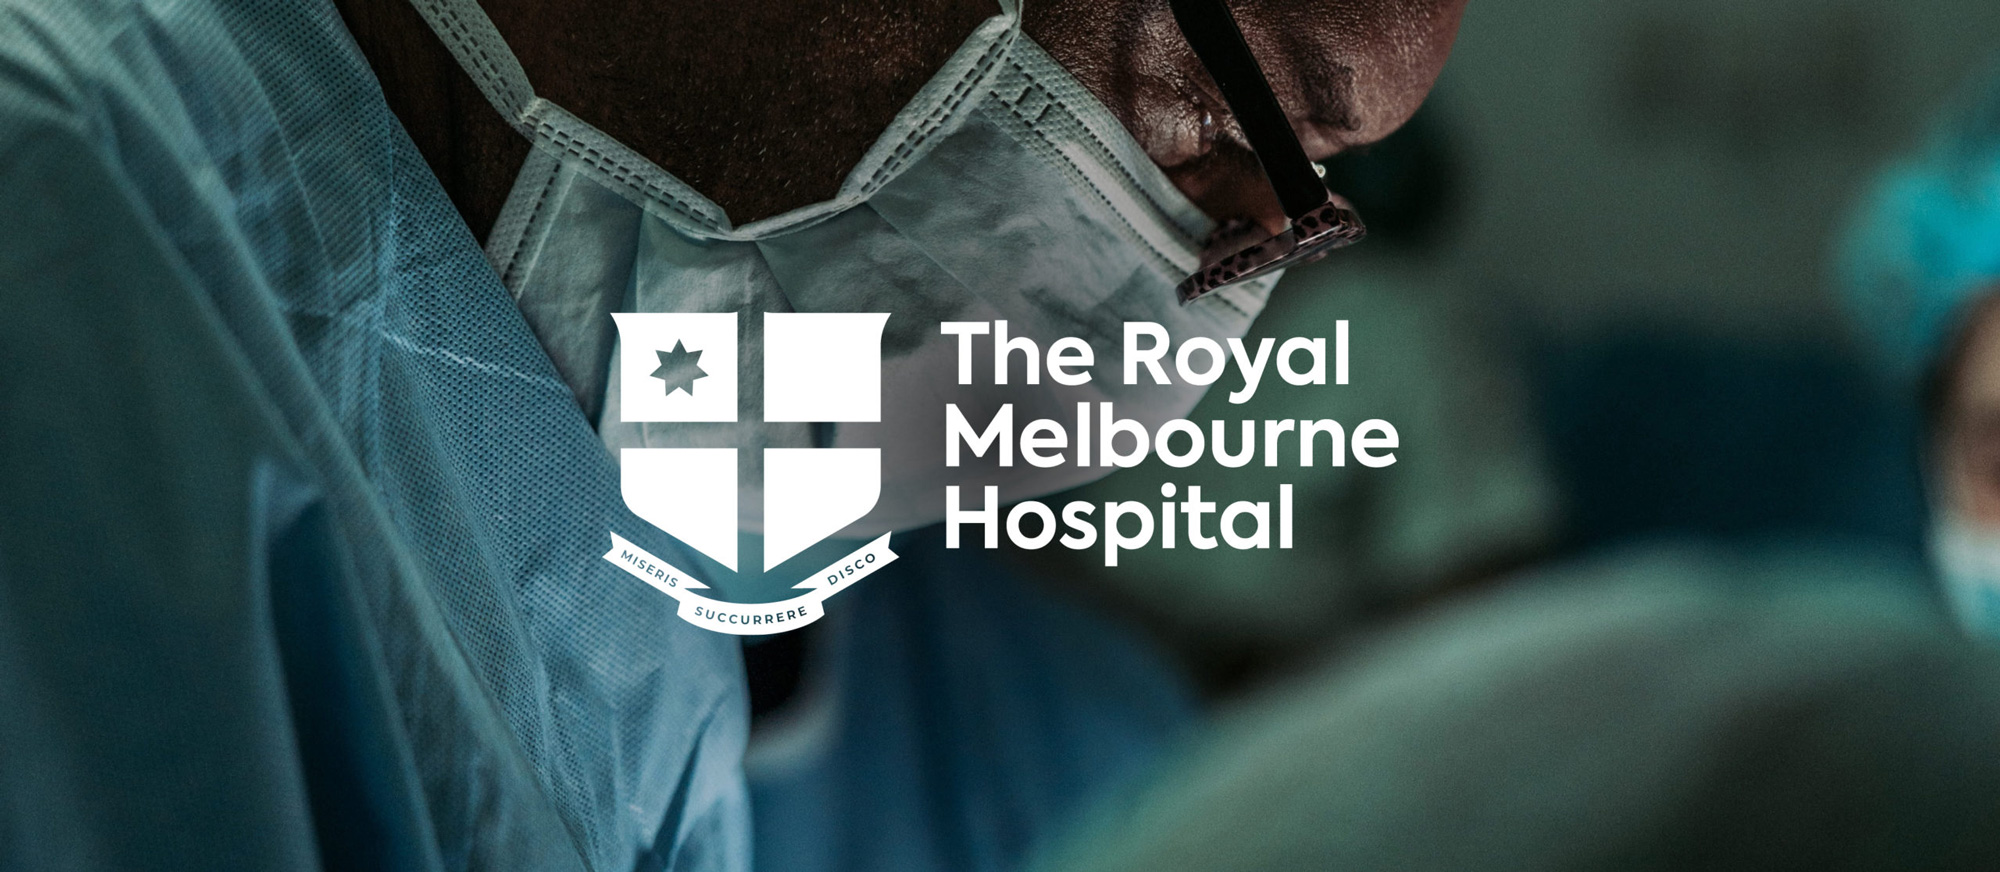 Brand New New Logo and Identity for The Royal Melbourne Hospital by